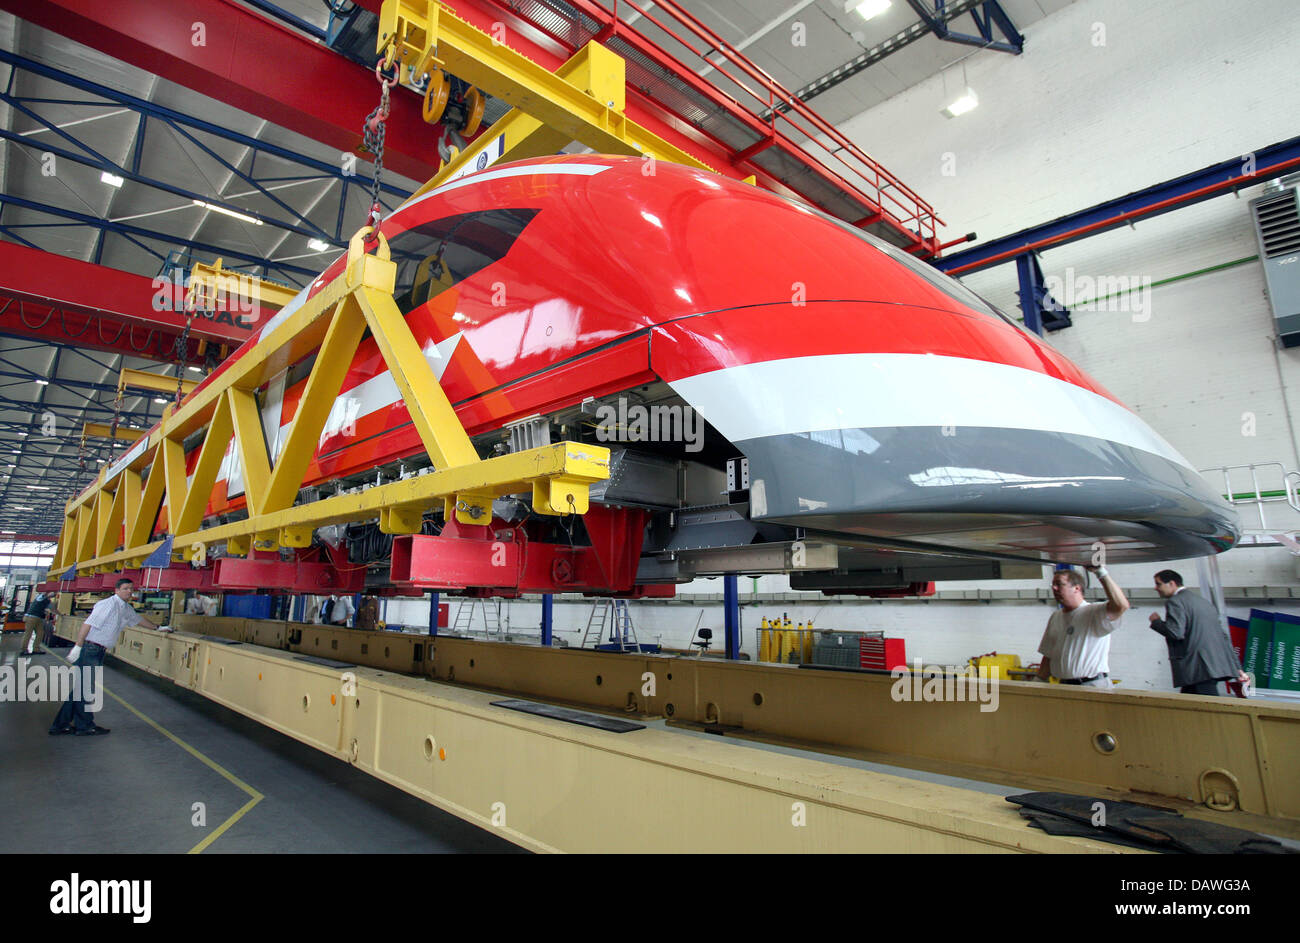 The TR09, a 'Transrapid' maglev train designed for a possible maglev service in Munich, is transferred to a special transporter by ThyssenKrupp employees in Kassel, Germany, 17 April 2007. The 25m long front section of the train weighs 50 tons and will be brought to the maglev test track in the Emsland region, north west Germany. The transfer is planned to take two nights. The othe Stock Photo